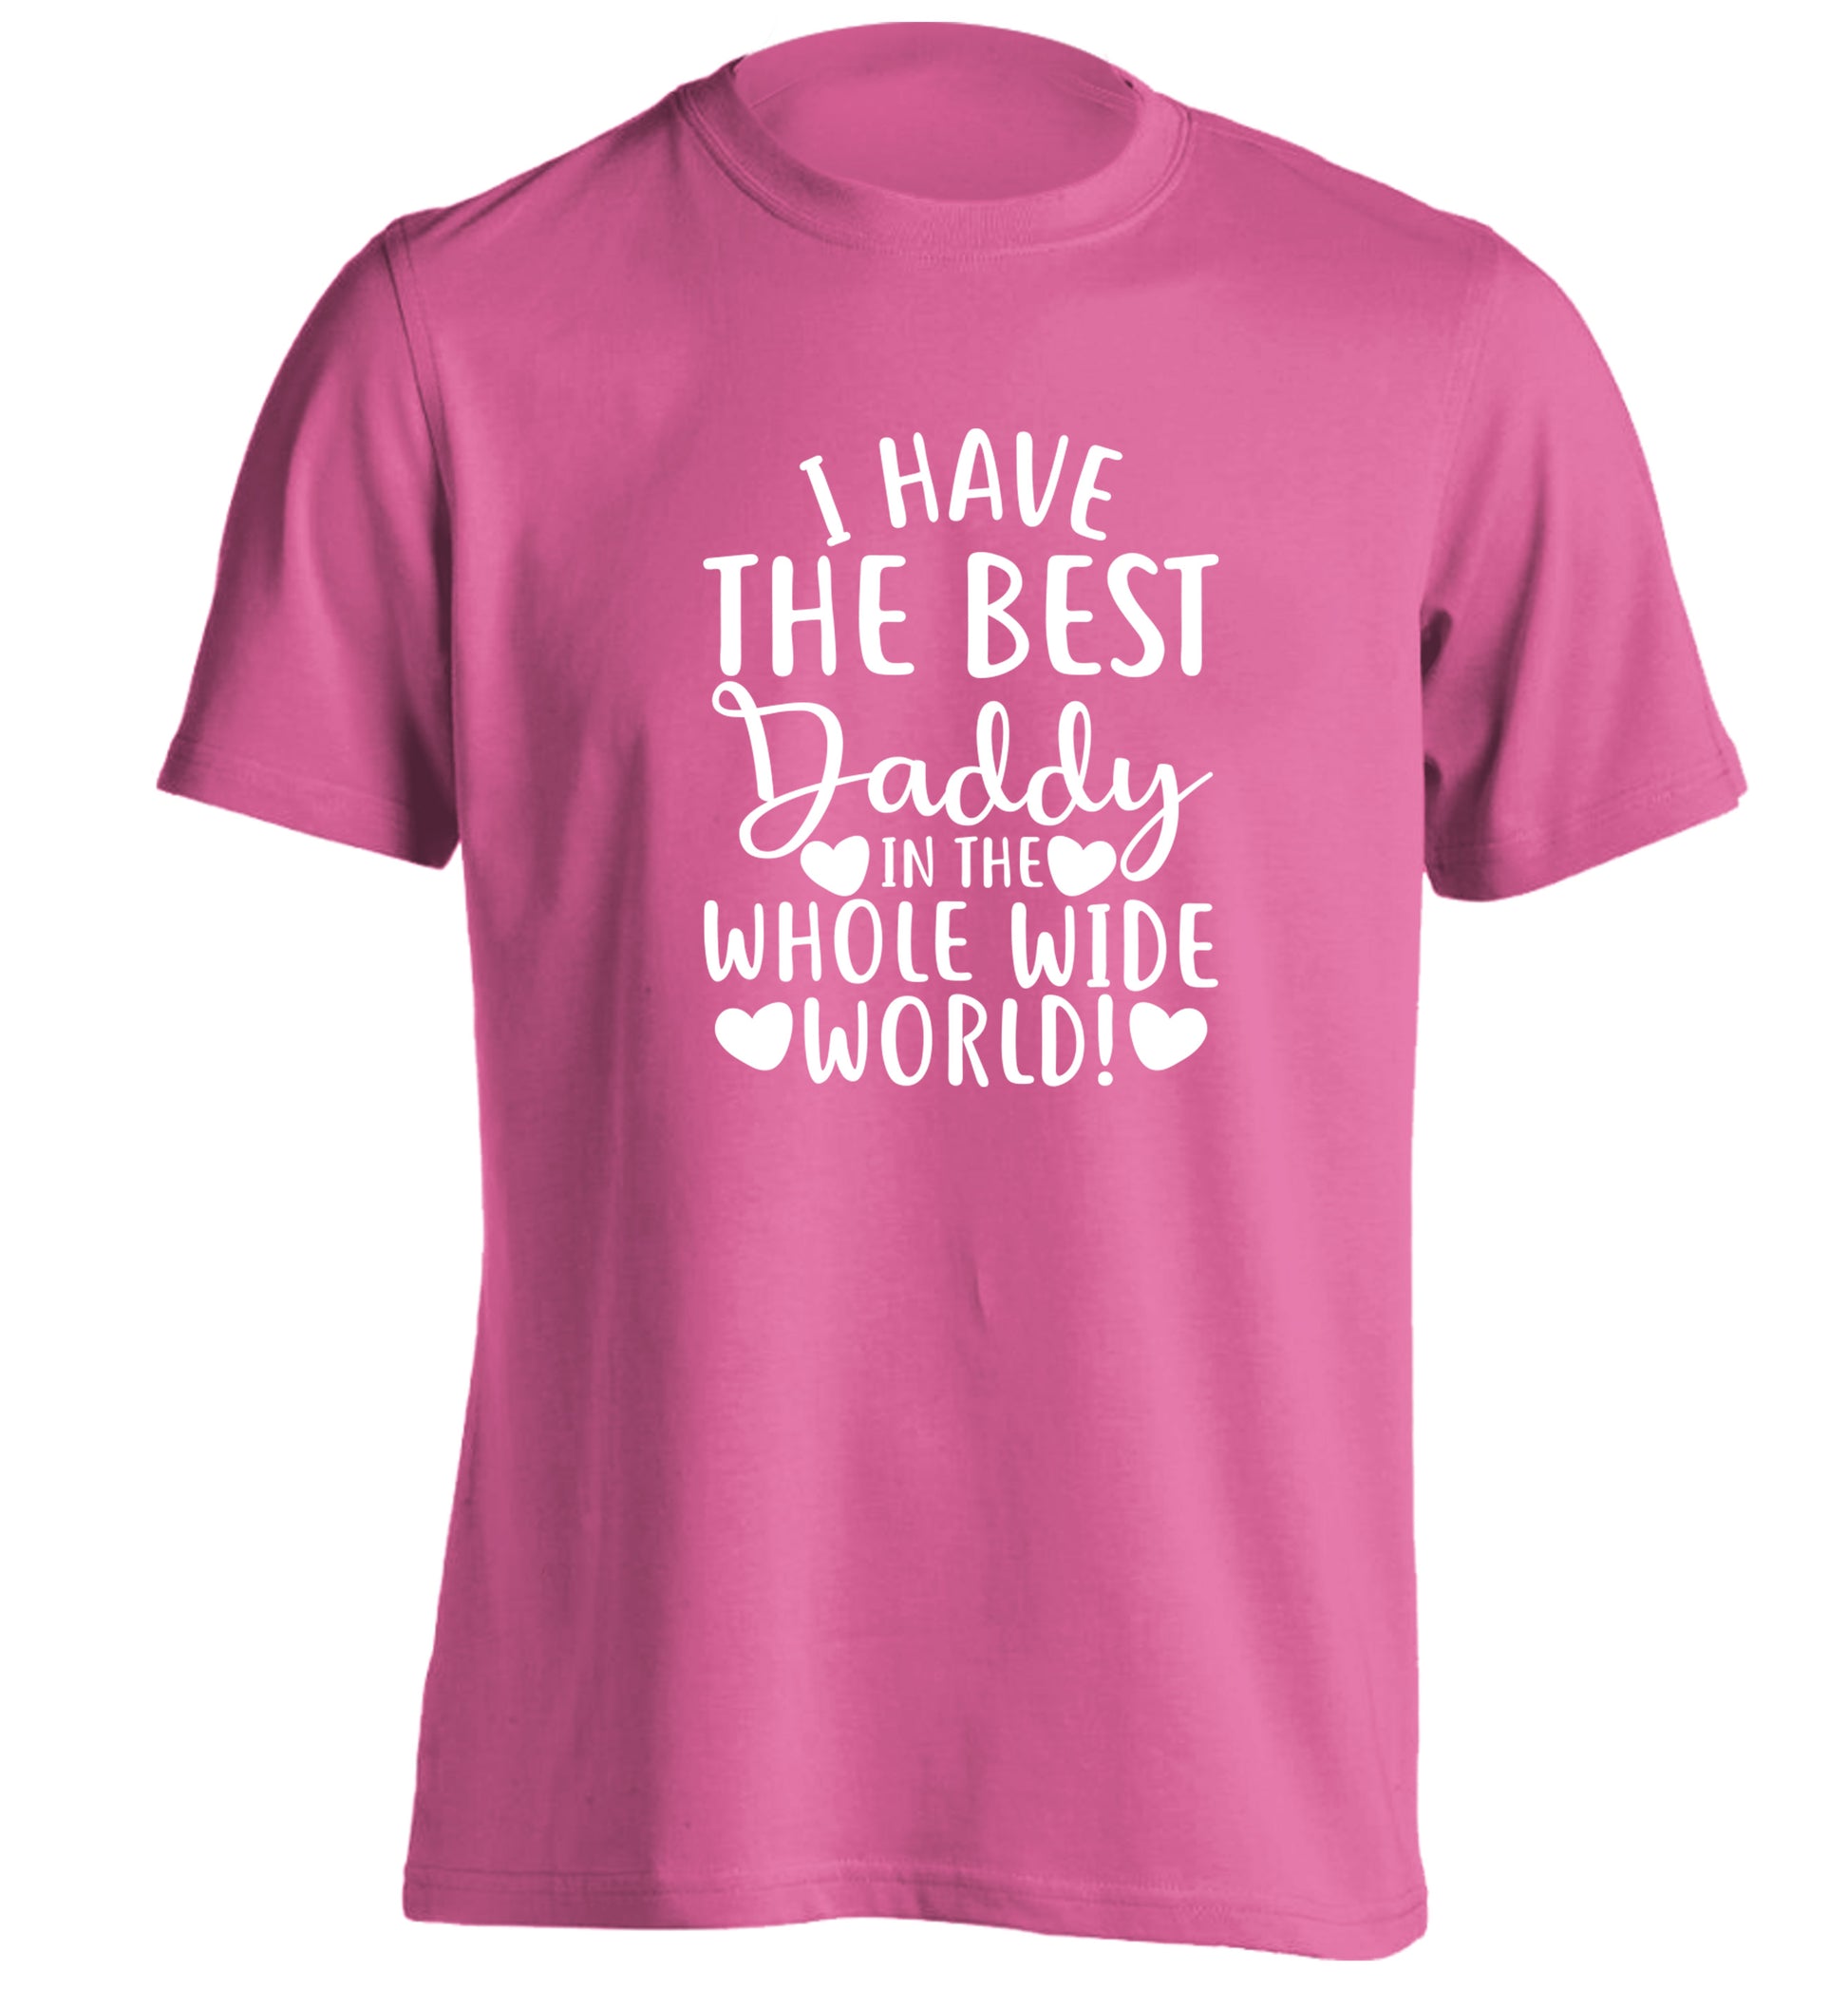 I have the best daddy in the whole wide world adults unisex pink Tshirt 2XL